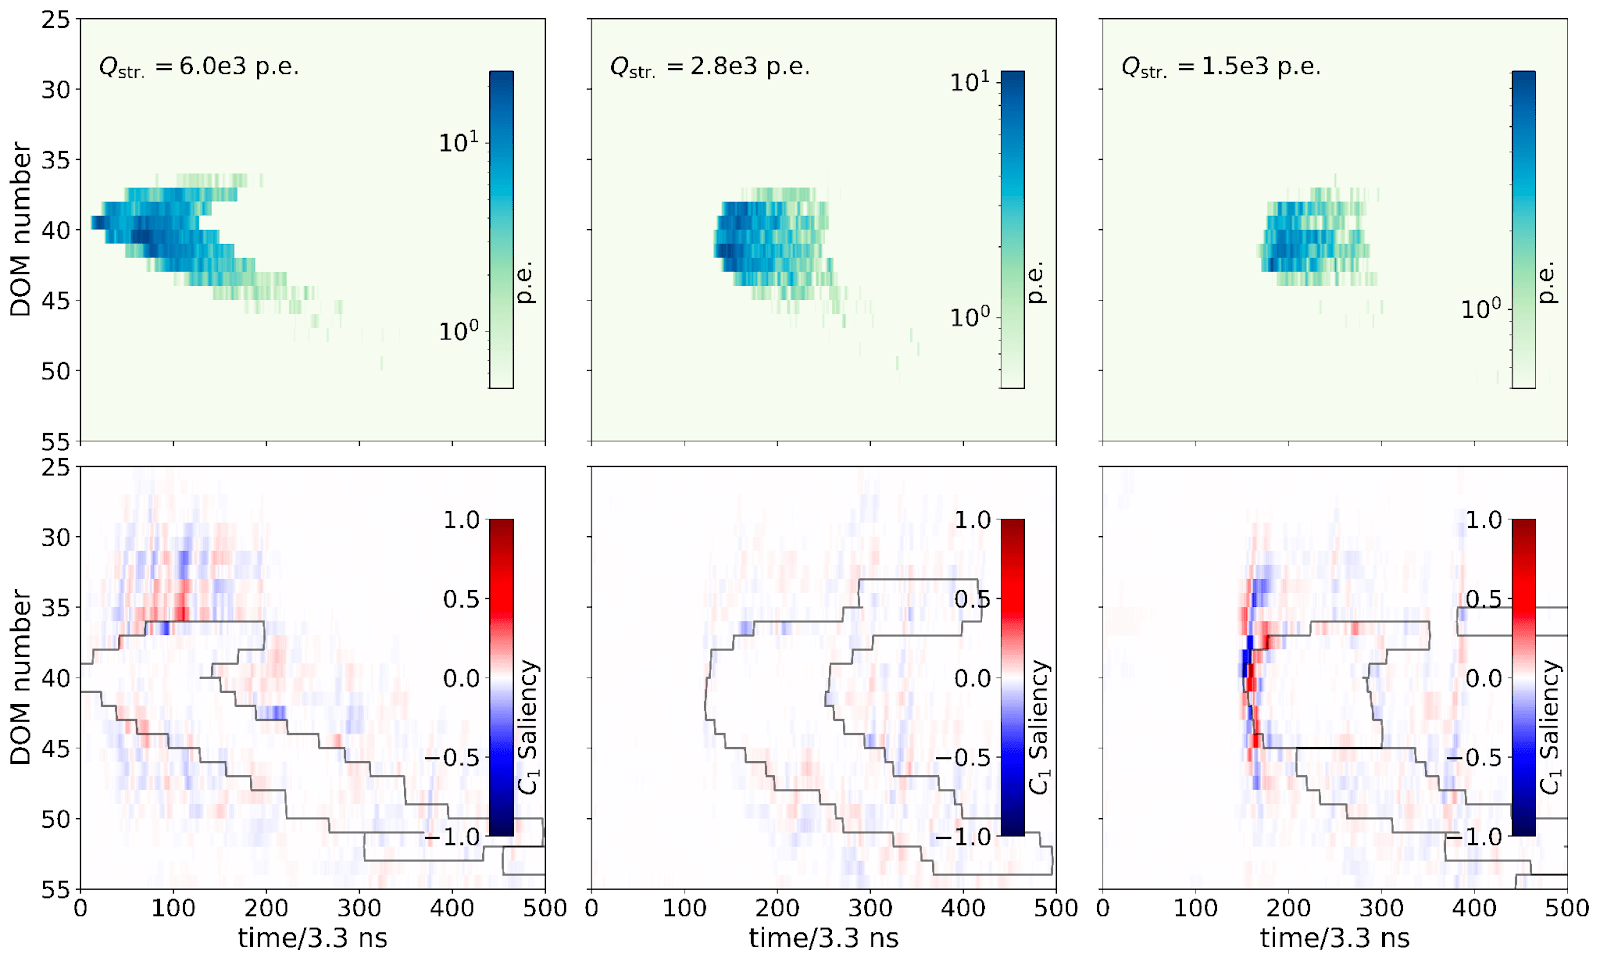 Candidate astrophysical tau neutrino detected on November 13, 2019. Each column corresponds to one of the three neighboring strings of the selected event. Each figure in the top row shows the DOM number, proportional to the depth, versus the time of the digitized PMT signal in 3-ns bins, with the bin color corresponding to the size of the signal in each time bin, for each of the three strings. The total number of photons detected by each string is provided at the upper left in each figure. In the most-illuminated string (left column), the arrival of light from two cascades is visible as two distinct hyperbolas. The bottom row of figures shows the “saliency” for one of the CNNs for each of the three strings. The saliency shows where changes in light level have the greatest impact on the value of the CNN score. The black line superimposed on the saliency plots shows where the light level goes to zero and is effectively an outline of the figures in the top row. The saliency is largest at the leading and trailing edges of the light emitted by the two tau neutrino cascades, showing that the CNN is mainly sensitive to the overall structure of the event. Credit: IceCube Collaboration